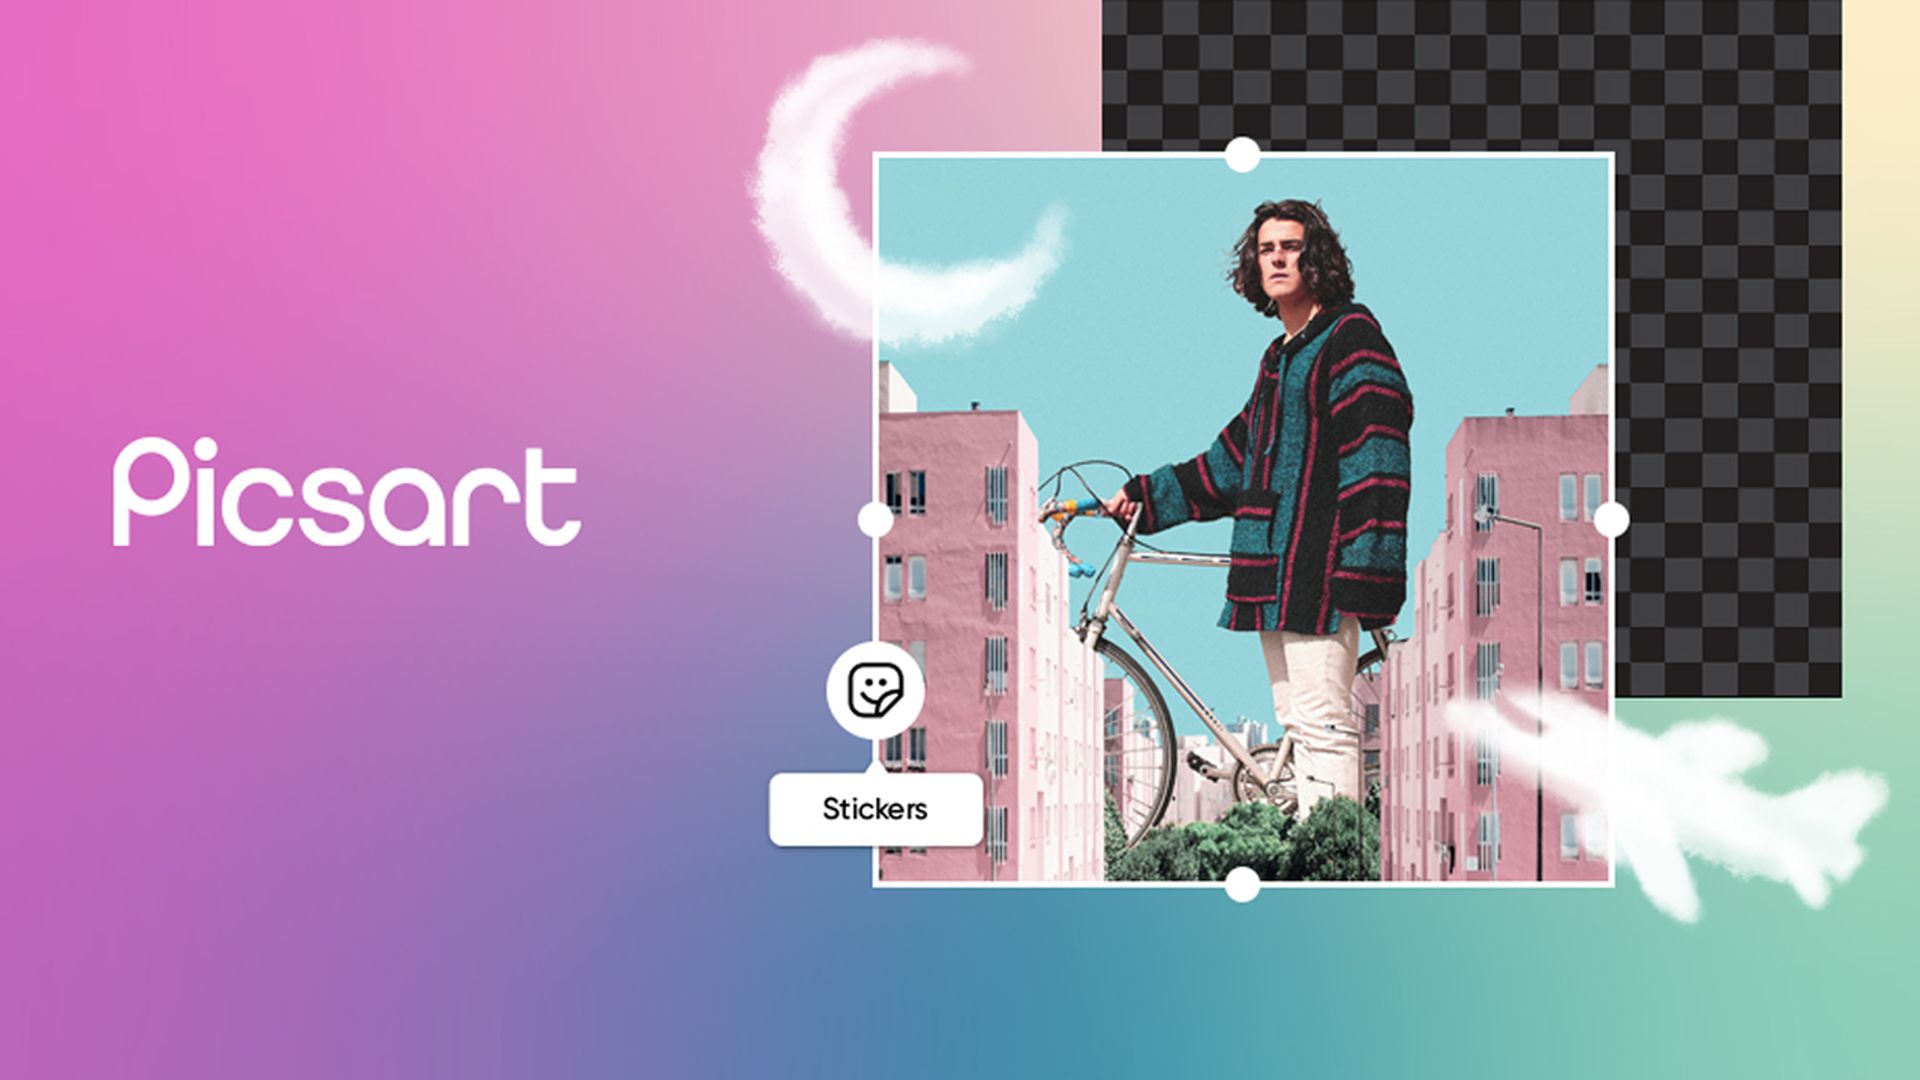 While it has many great editing features, some tools of Picsart require money. That is why, we will answer how to screenshot on Picsart without paying, in this article. 